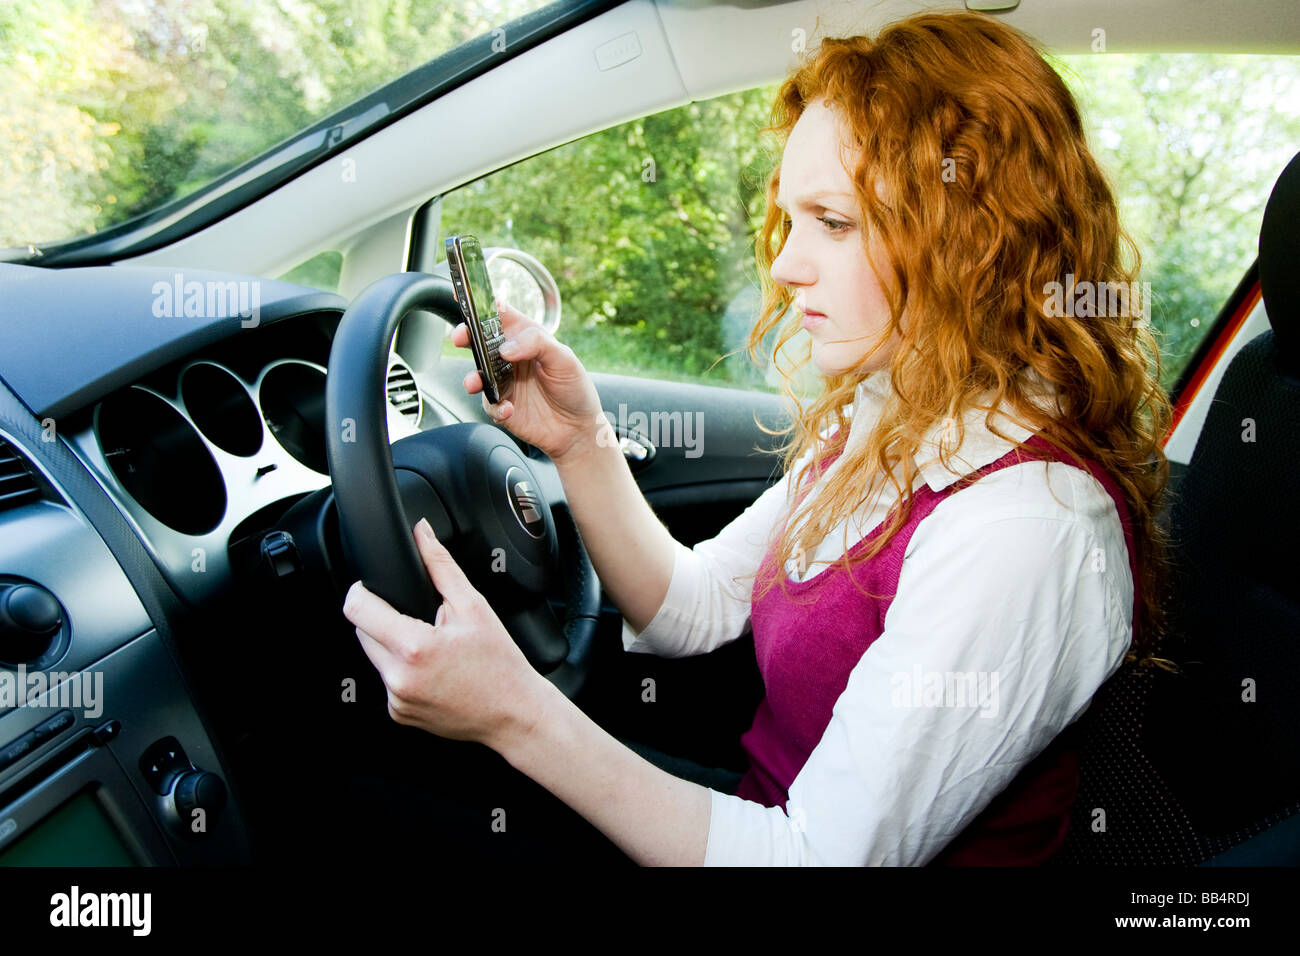 Girl texting whilst driving Stock Photo